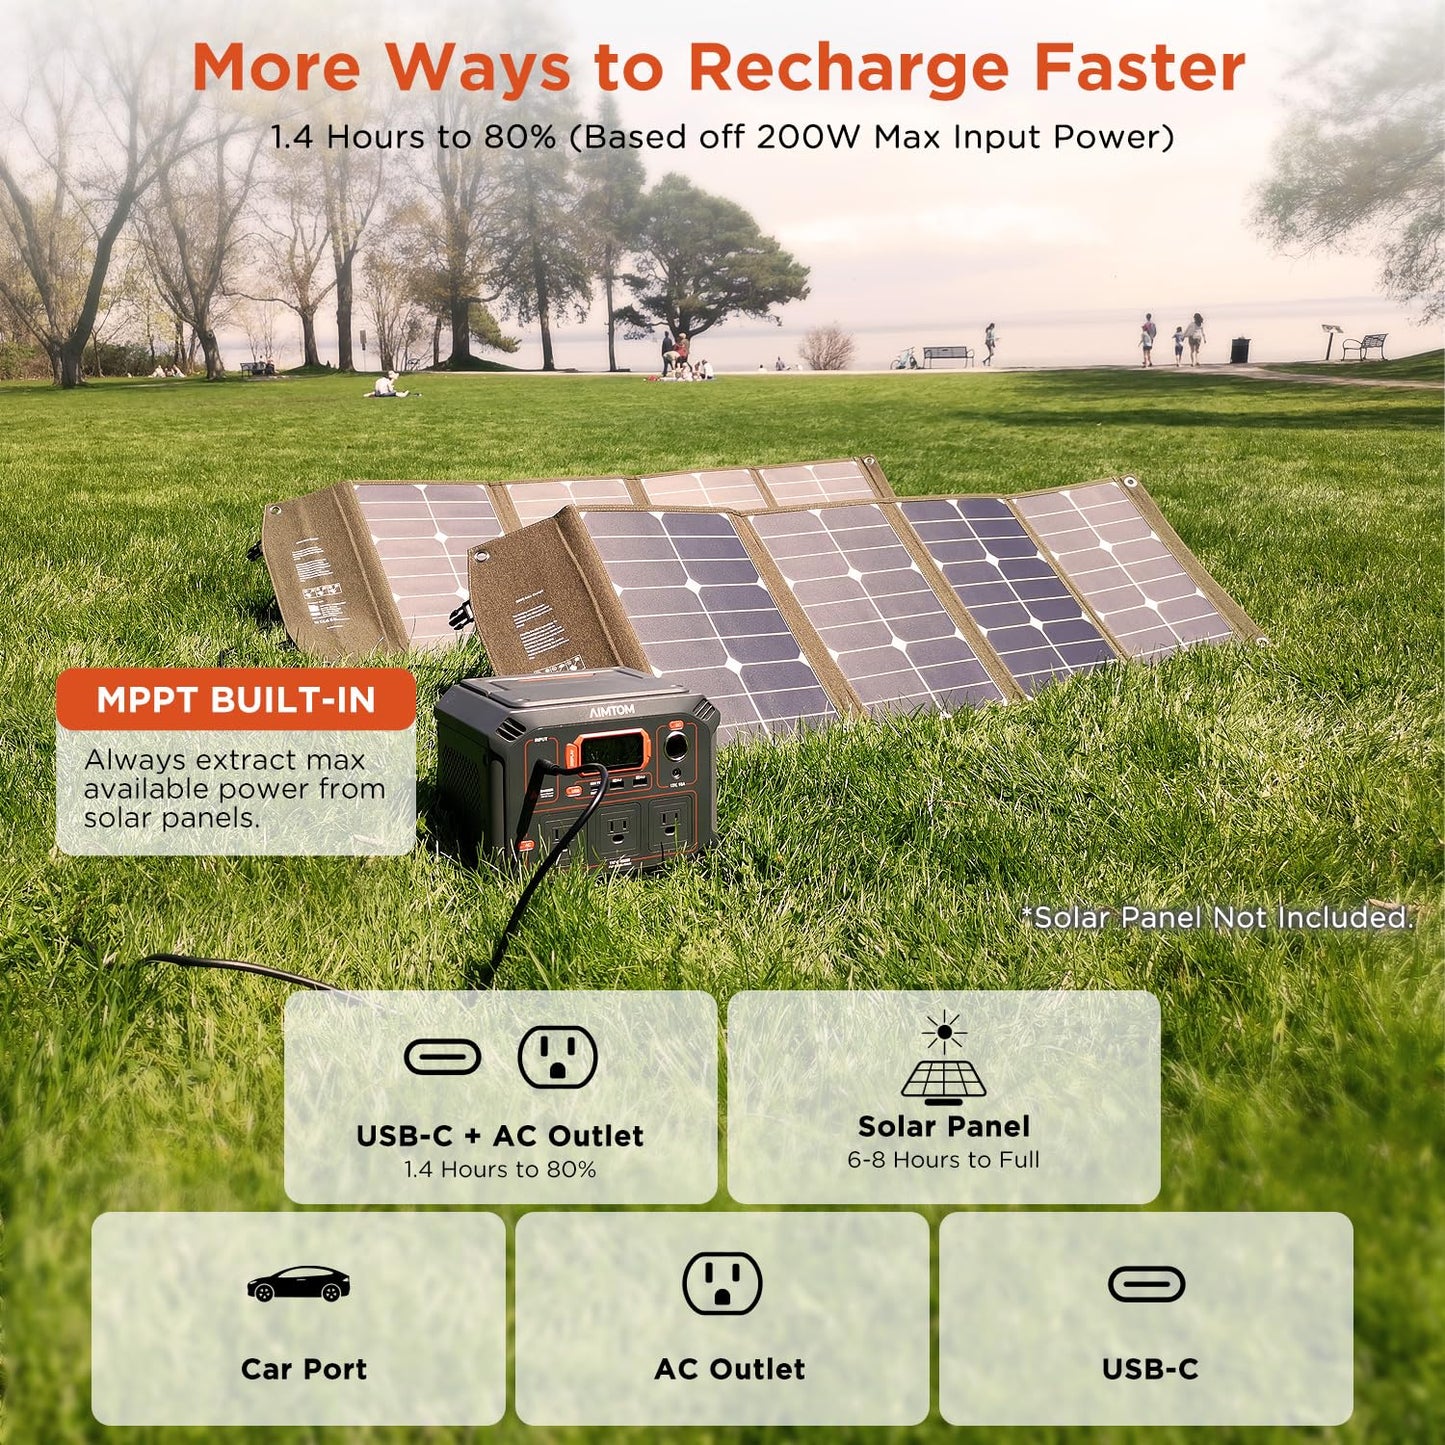 Portable Power Station Rebel400, 3x 440W (800W Surge) AC Outlets, 4-Mode LED, USB, DC, Type-C, 296Wh Lithium Battery Solar Generator (Solar Panel Optional) for Camping, Power Outage, Home Backup